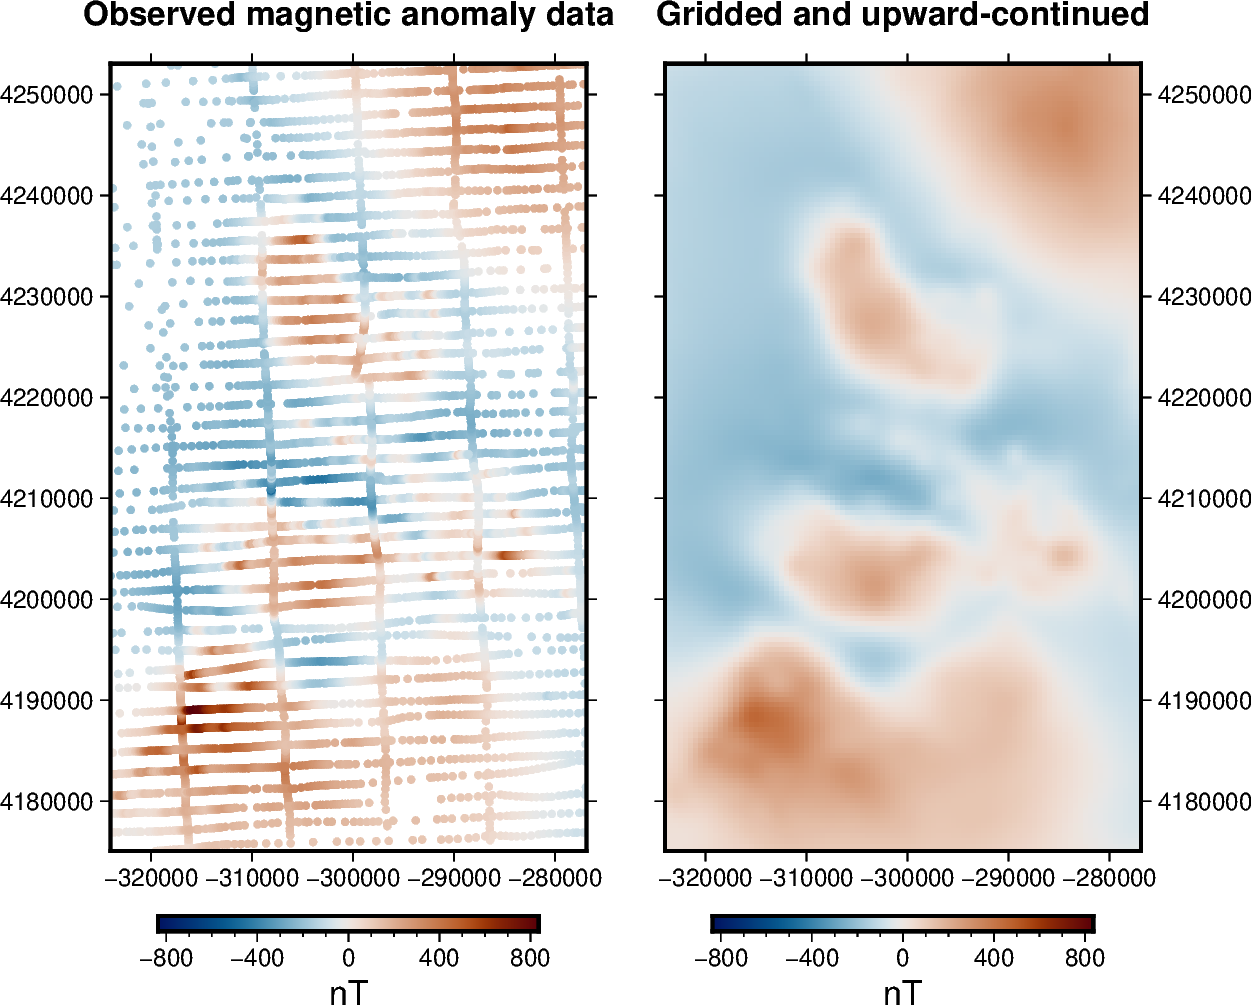 Observed magnetic anomaly data, Gridded and upward-continued